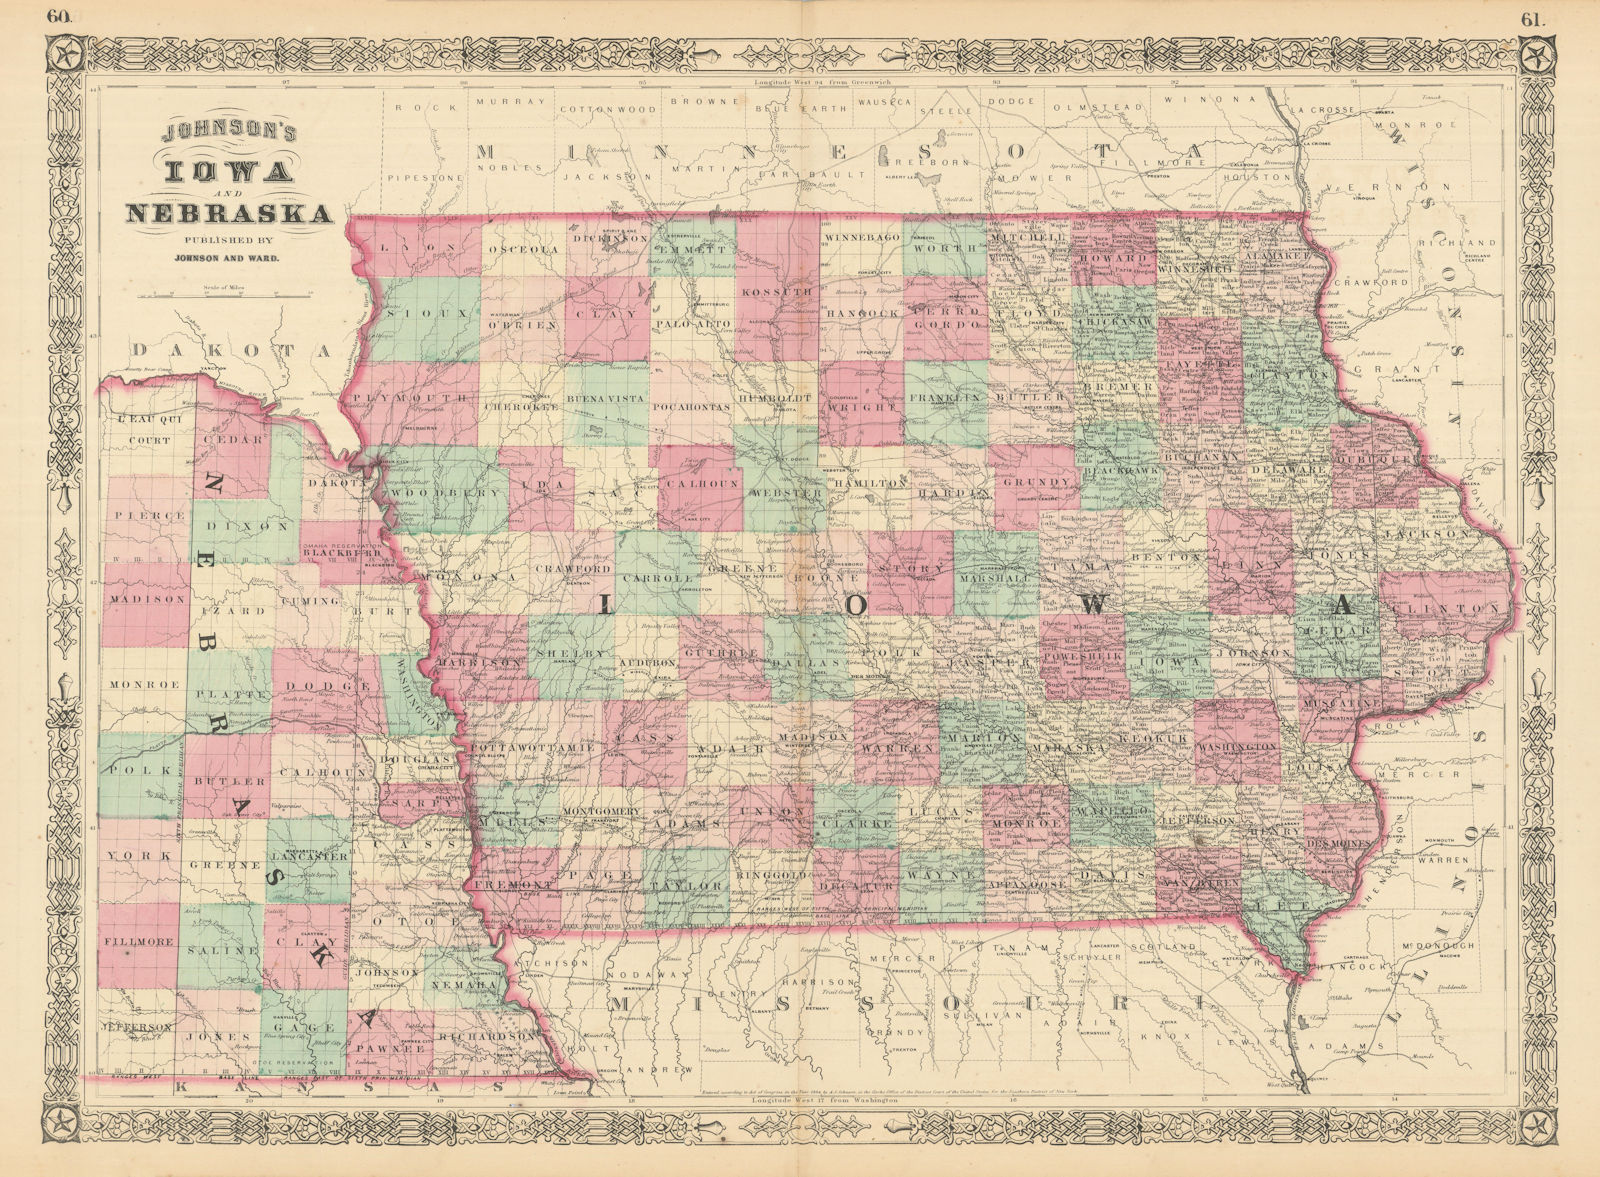 Associate Product Johnson's Iowa & Nebraska. US state map showing counties 1866 old antique